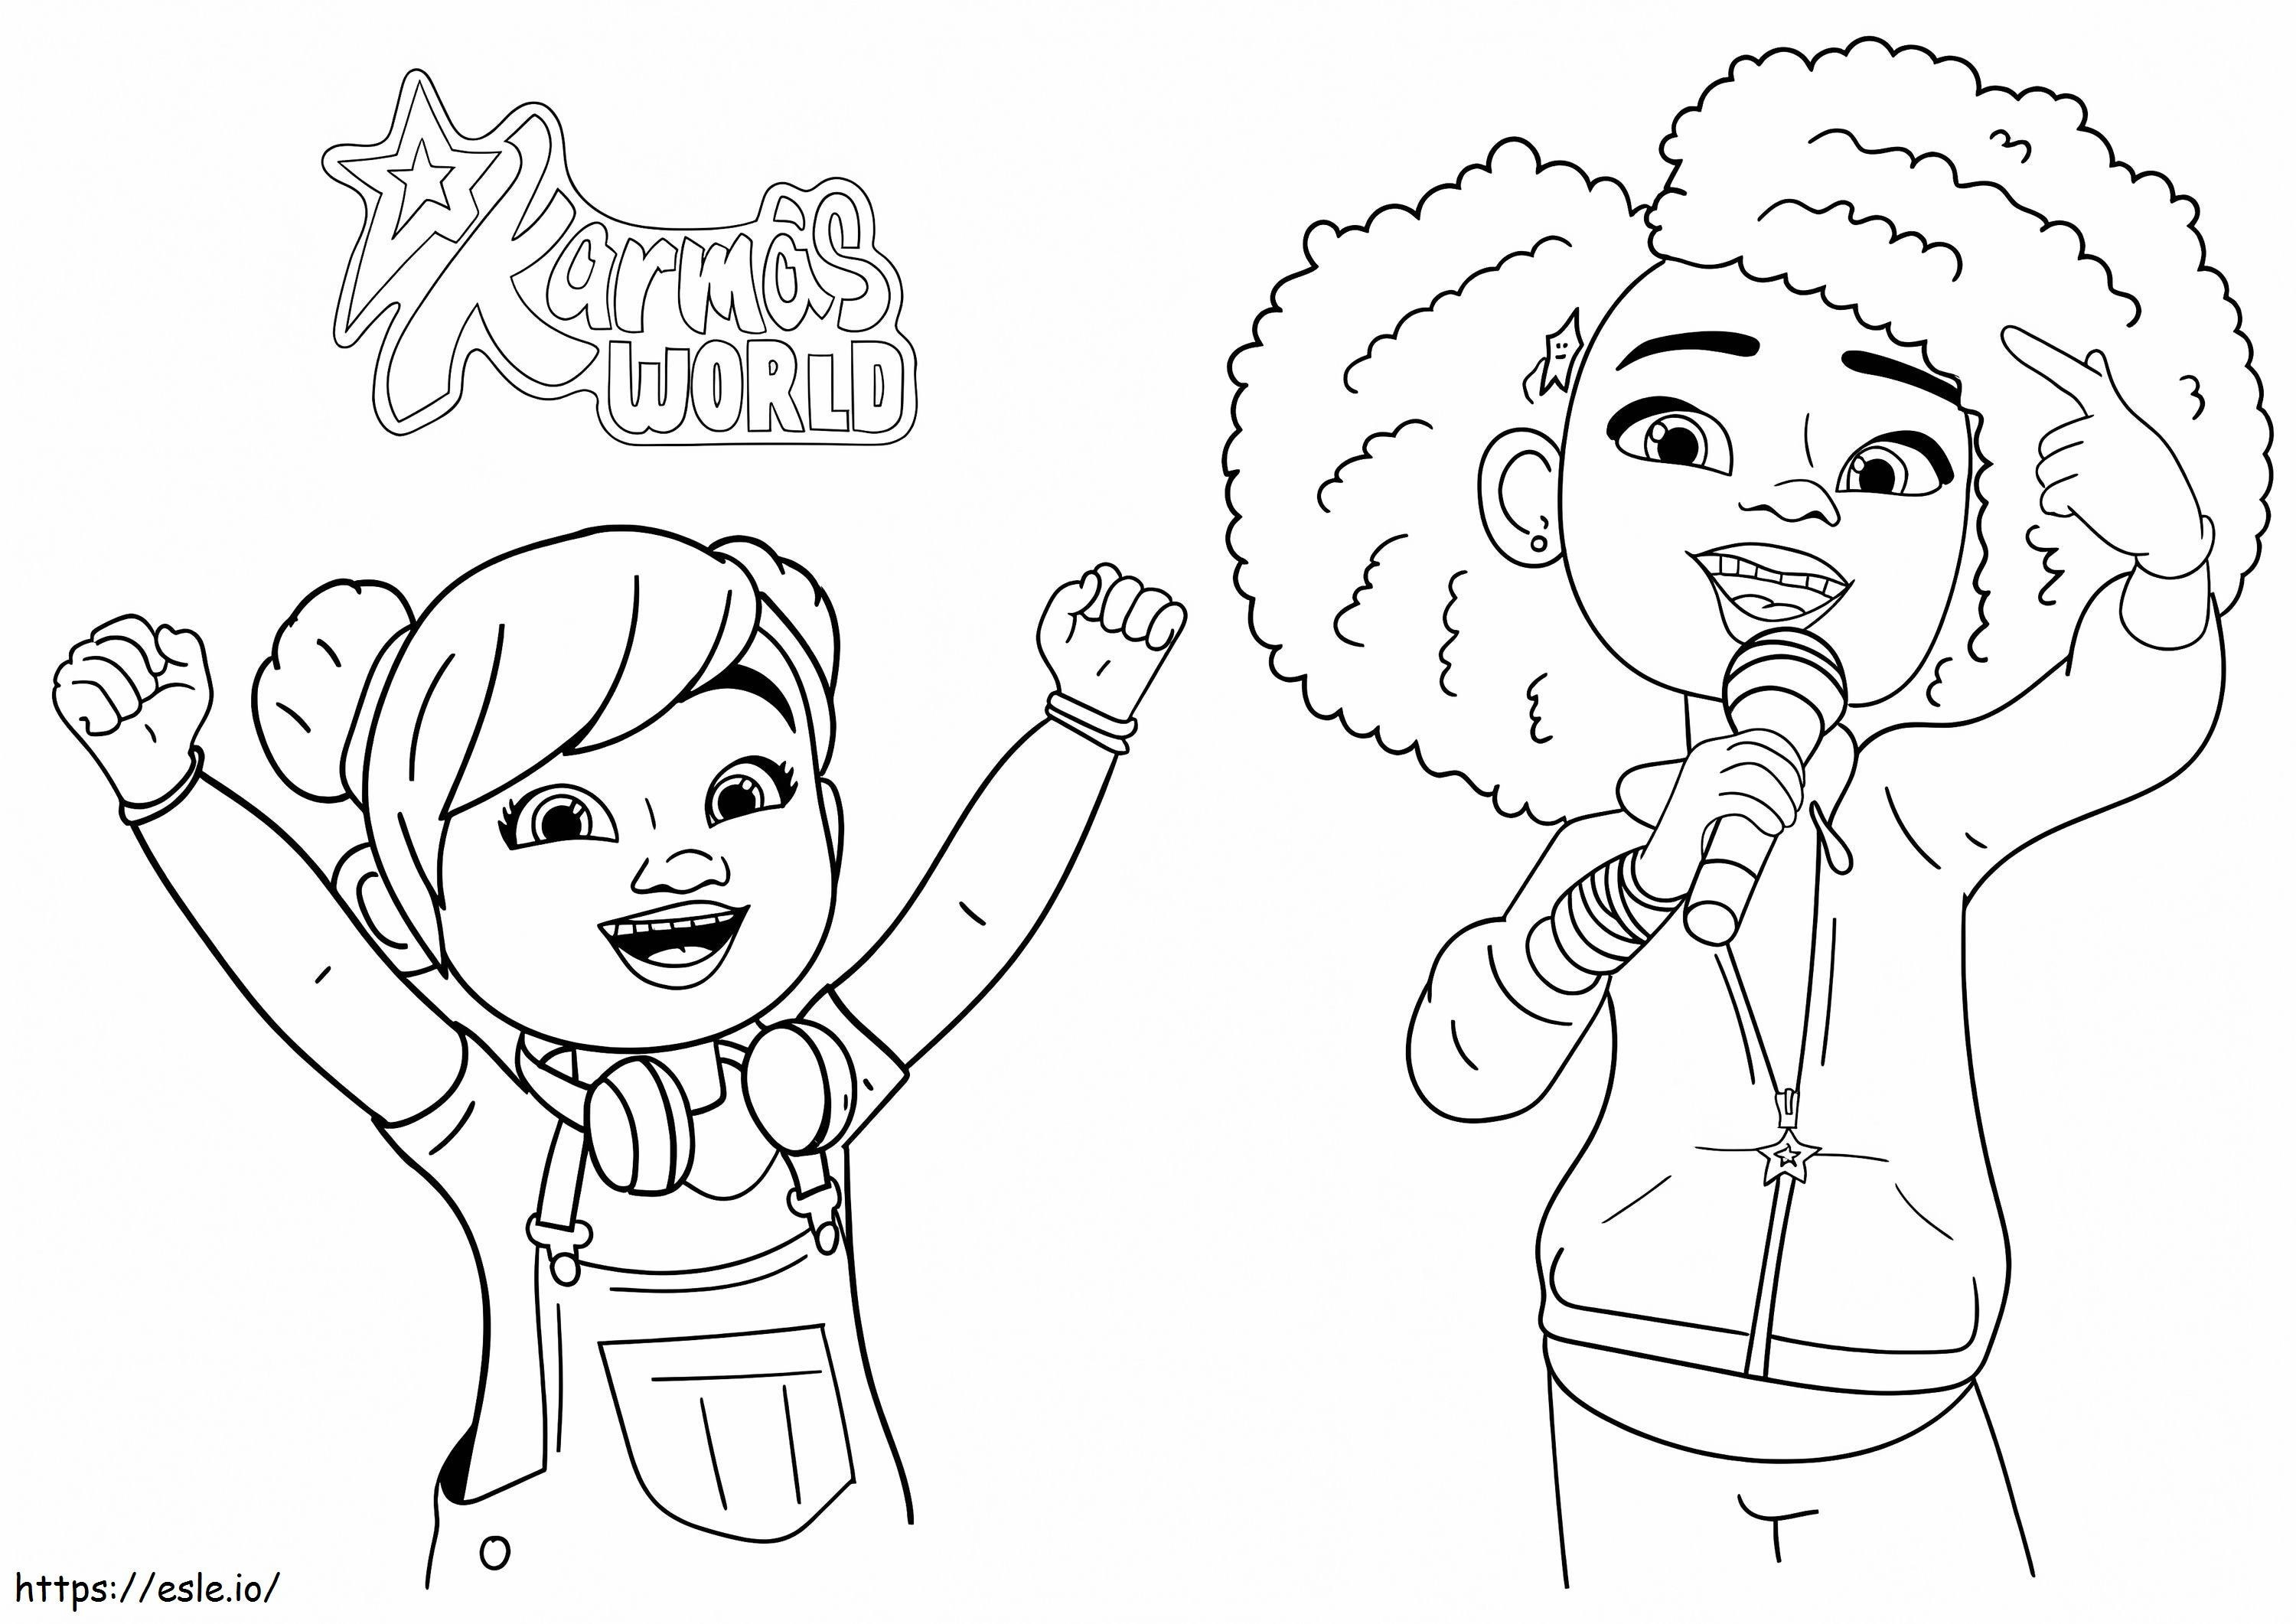 Switch And Karma coloring page